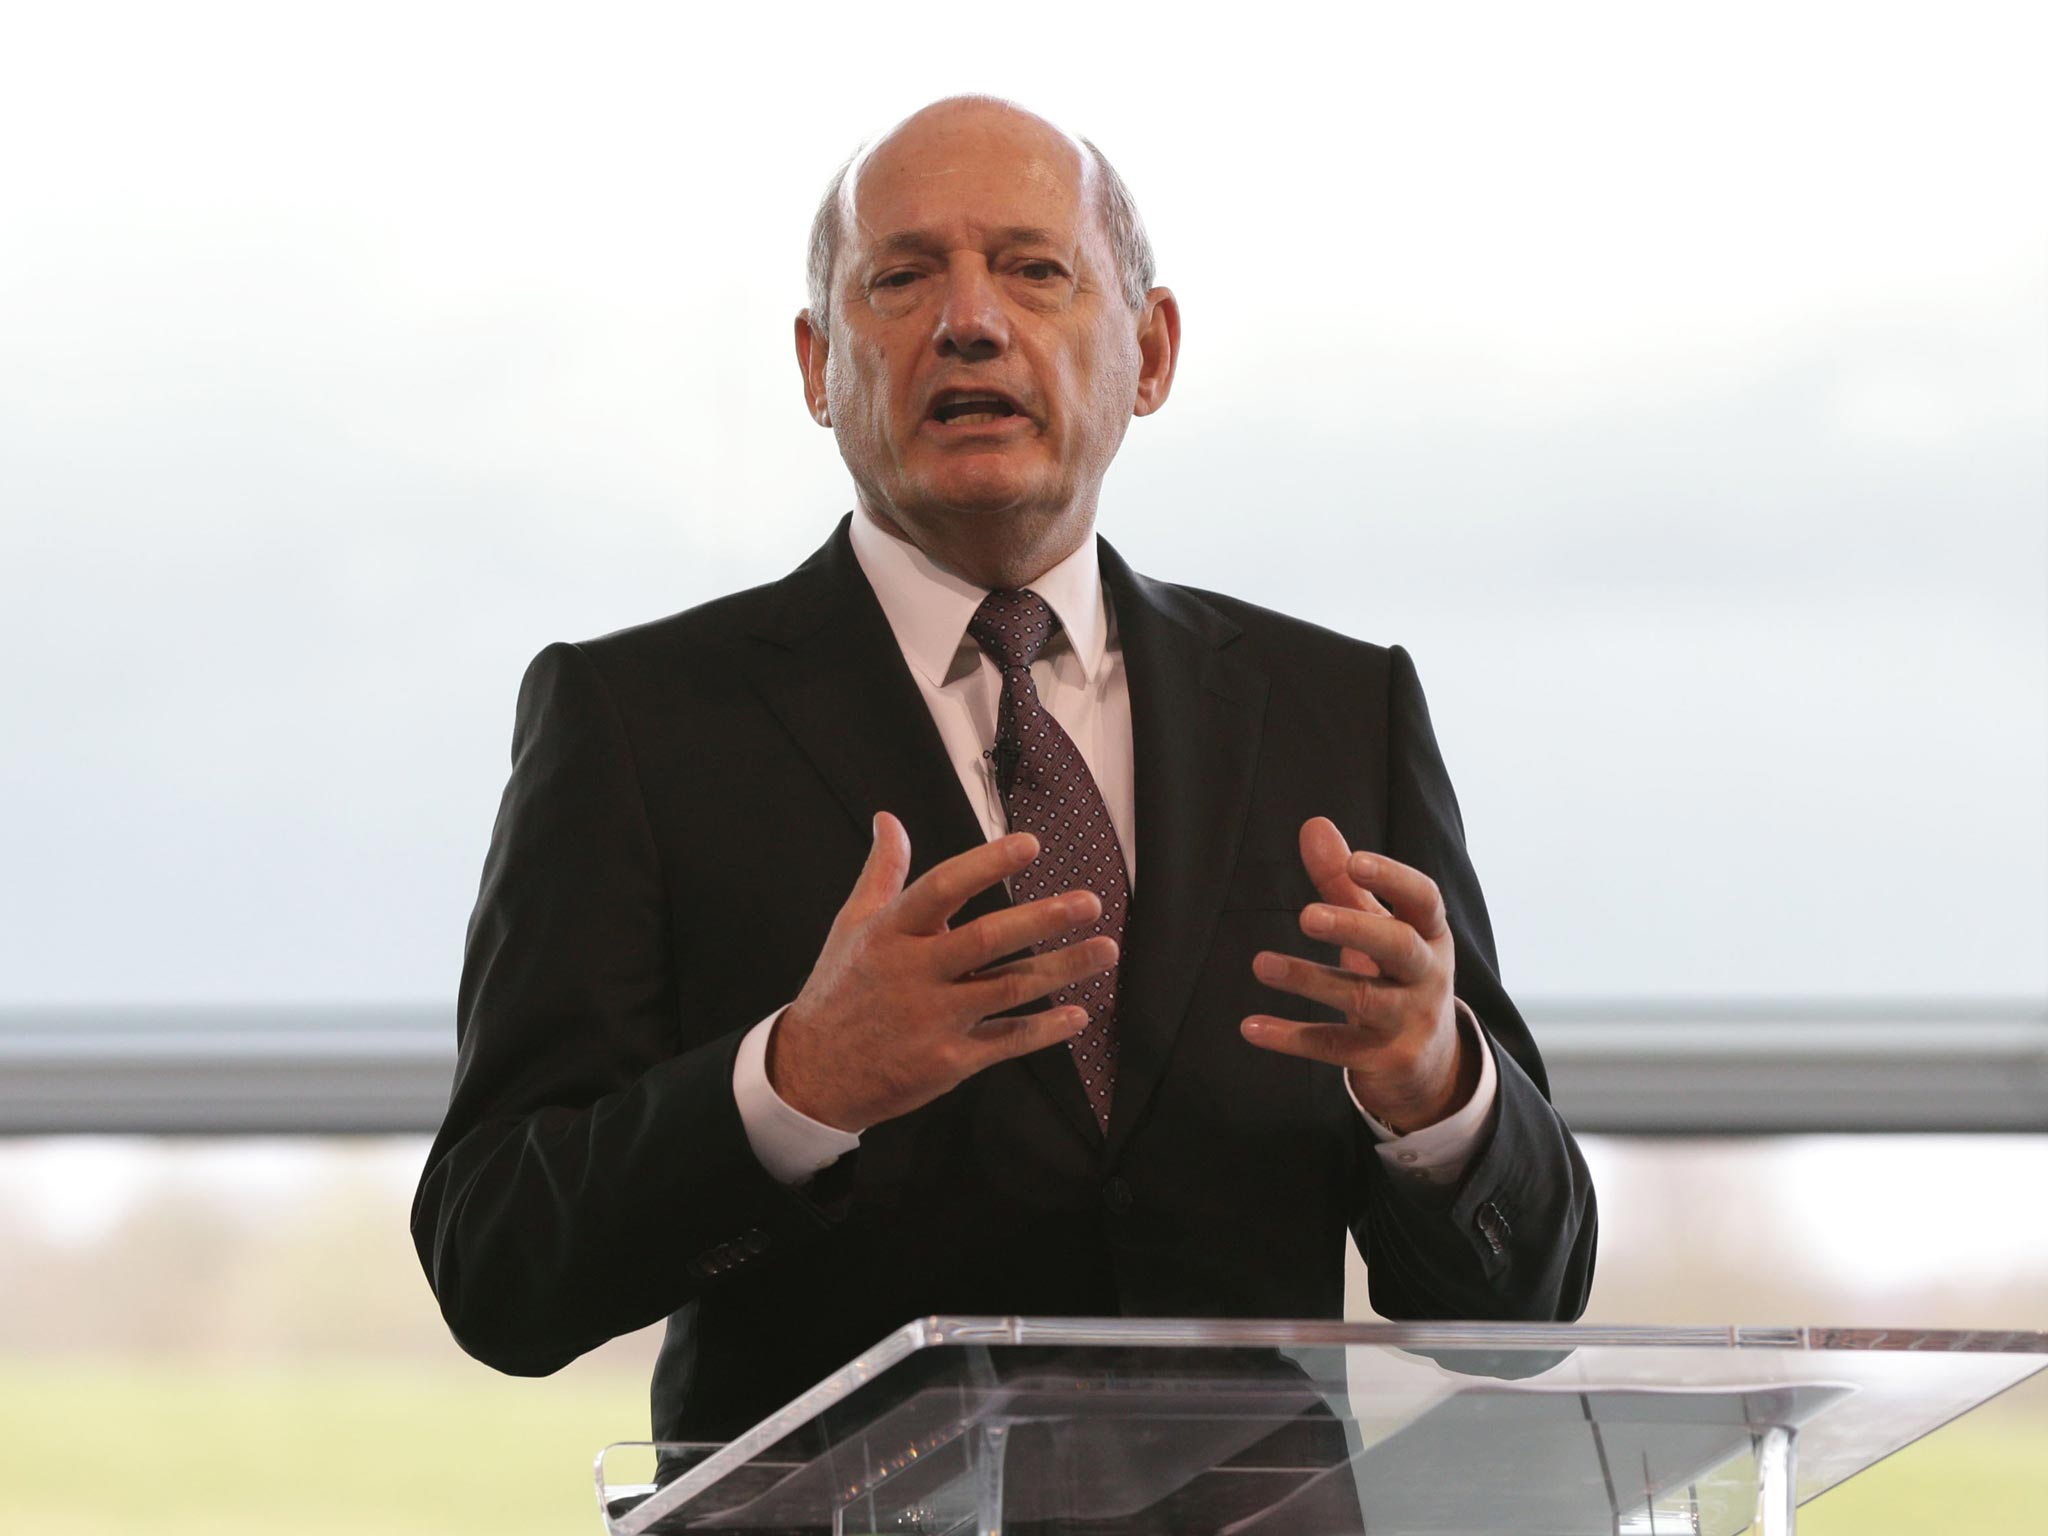 Ron Dennis, CEO of the McLaren Group says team members need to sharpen up